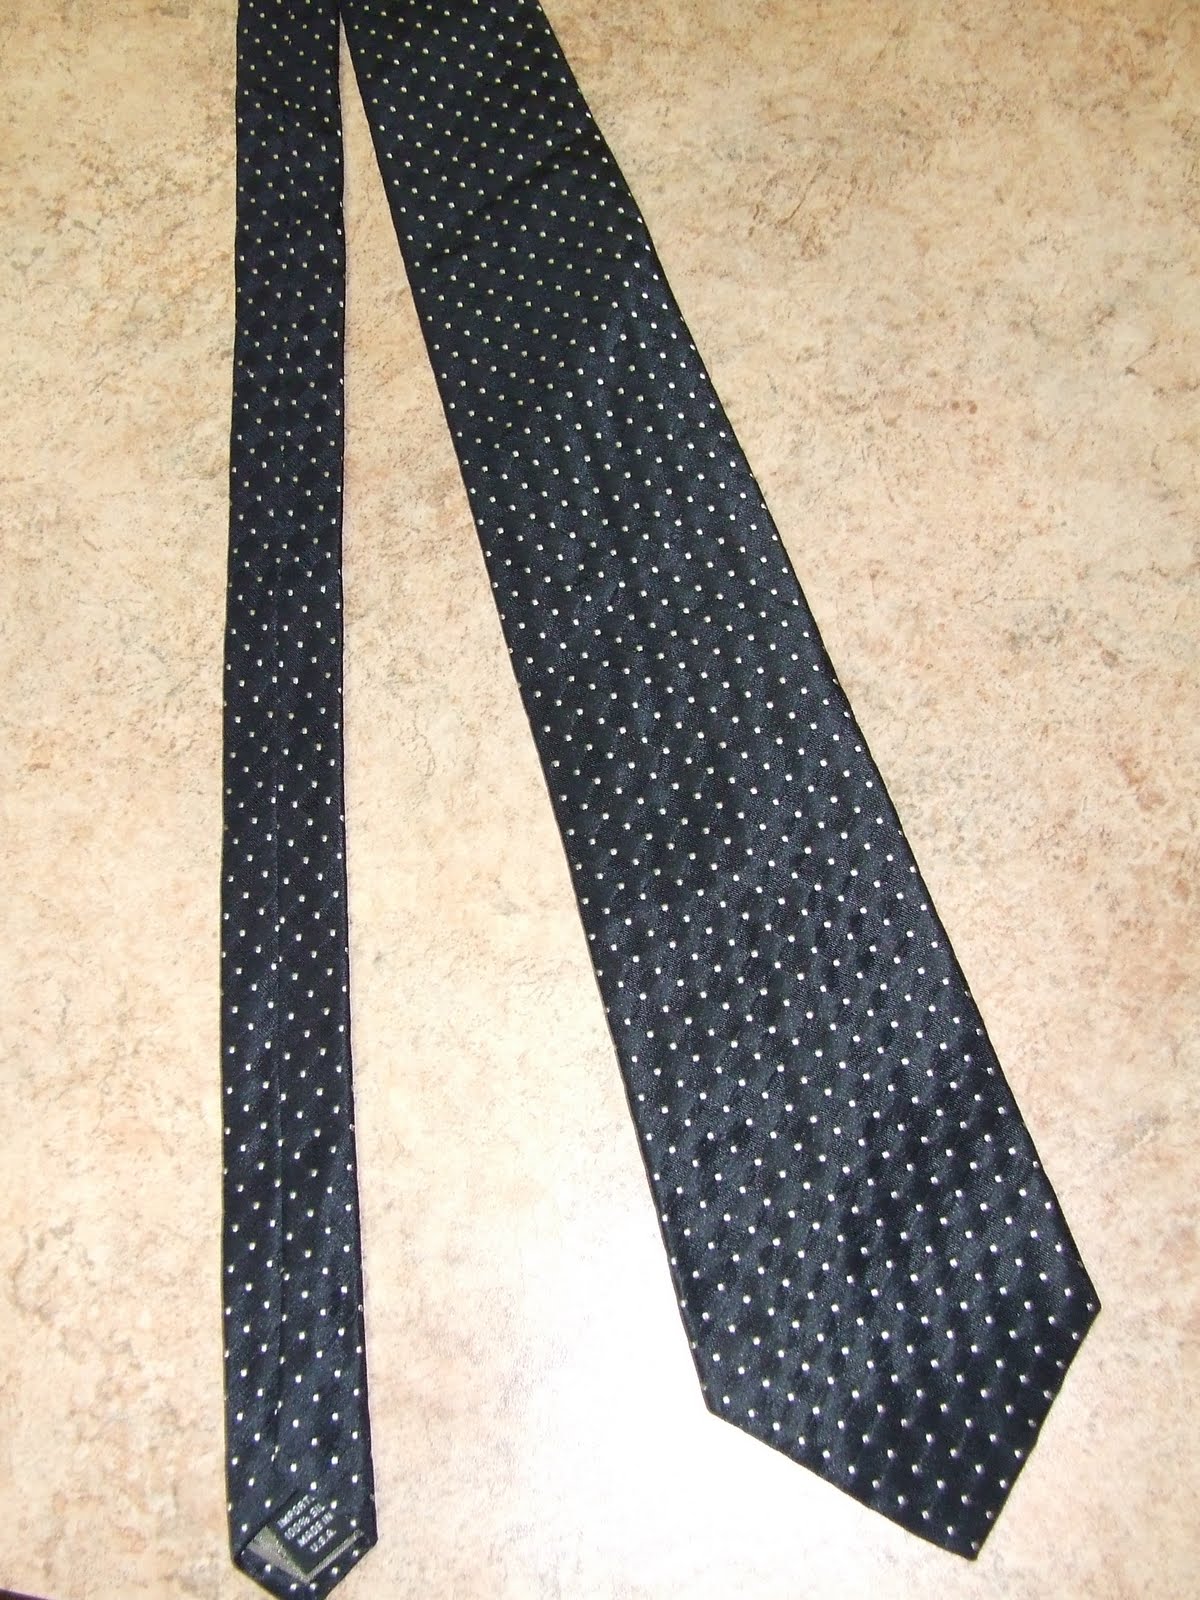 My Inner Need to Create...: Make a Man's Tie into a Velcro Kid's Tie...